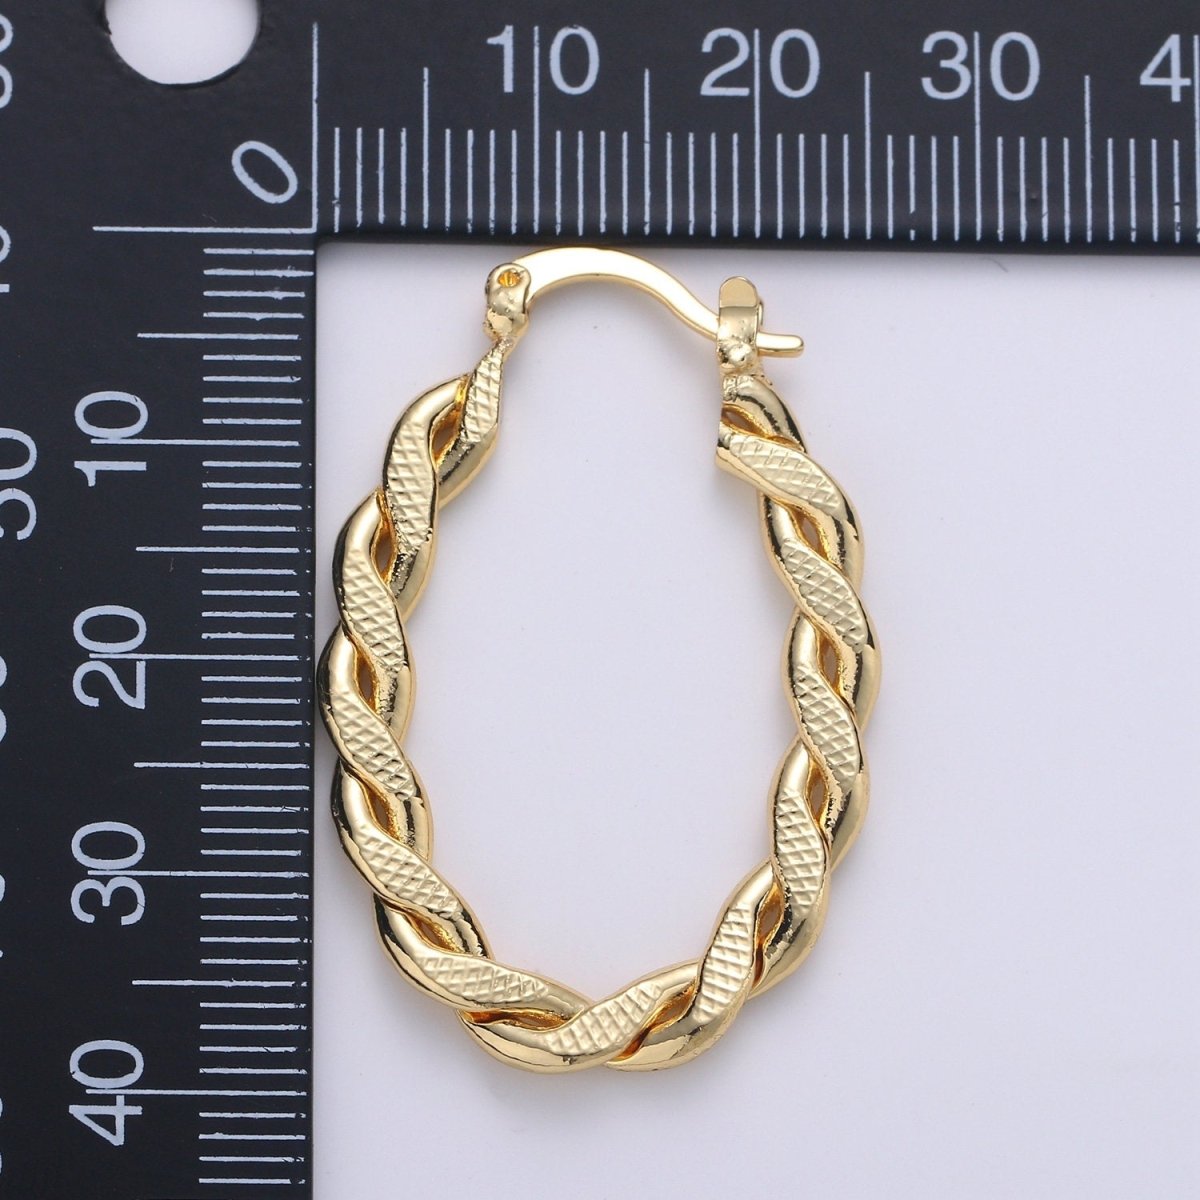 Thick Gold Oval Hoops Twisted Croissant Medium Trendy Hoop Earrings Gold Vermeil Earring Statement hoops fashion earrings for gift Q-236 - DLUXCA